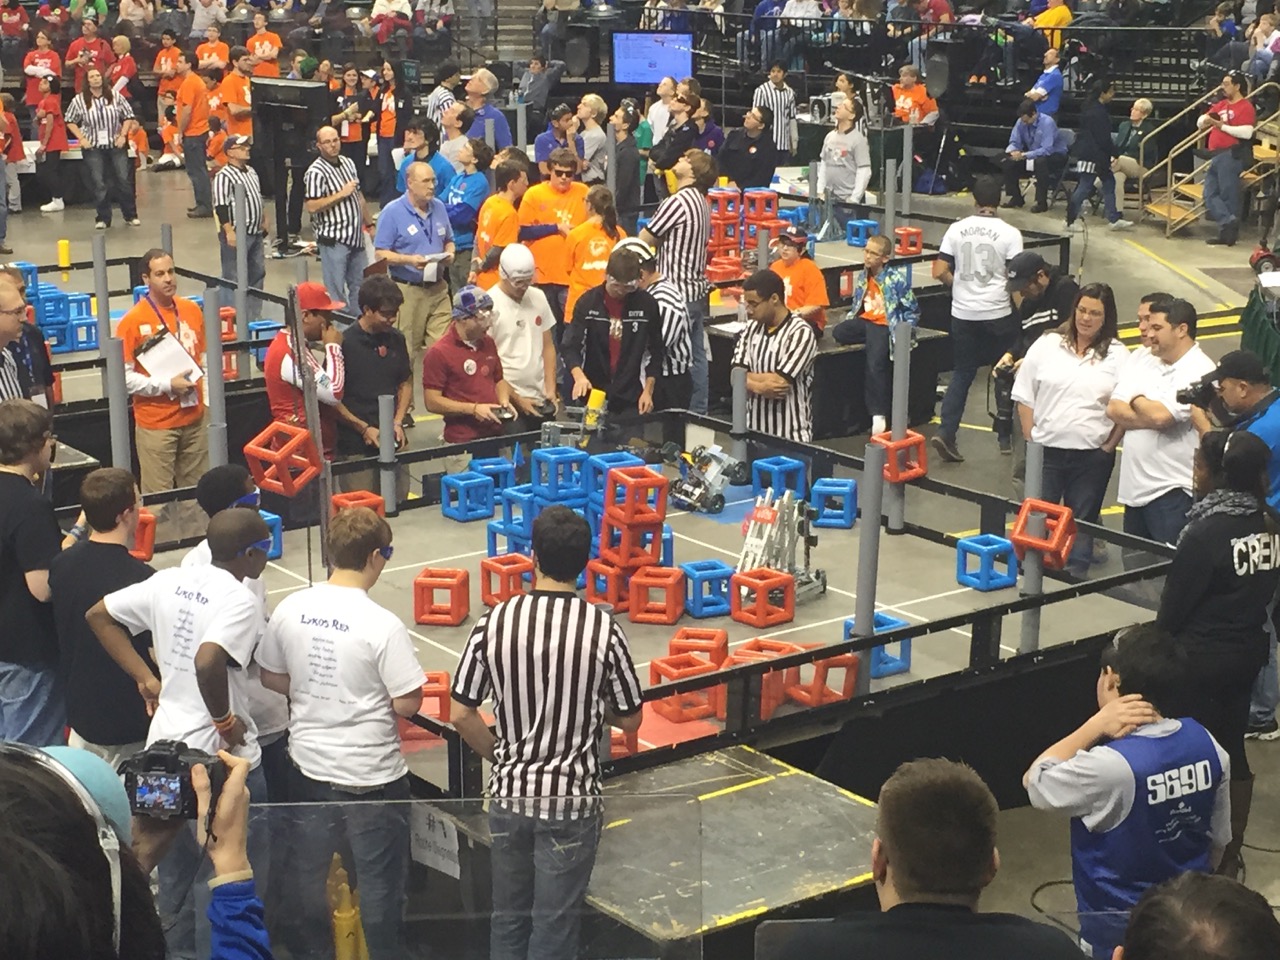 Providence Cristo Rey High School's robotics team competes in the VEX tournament Sunday. The goal of the challenge is to stack cubes on the gray goalposts or build towers in the arena.